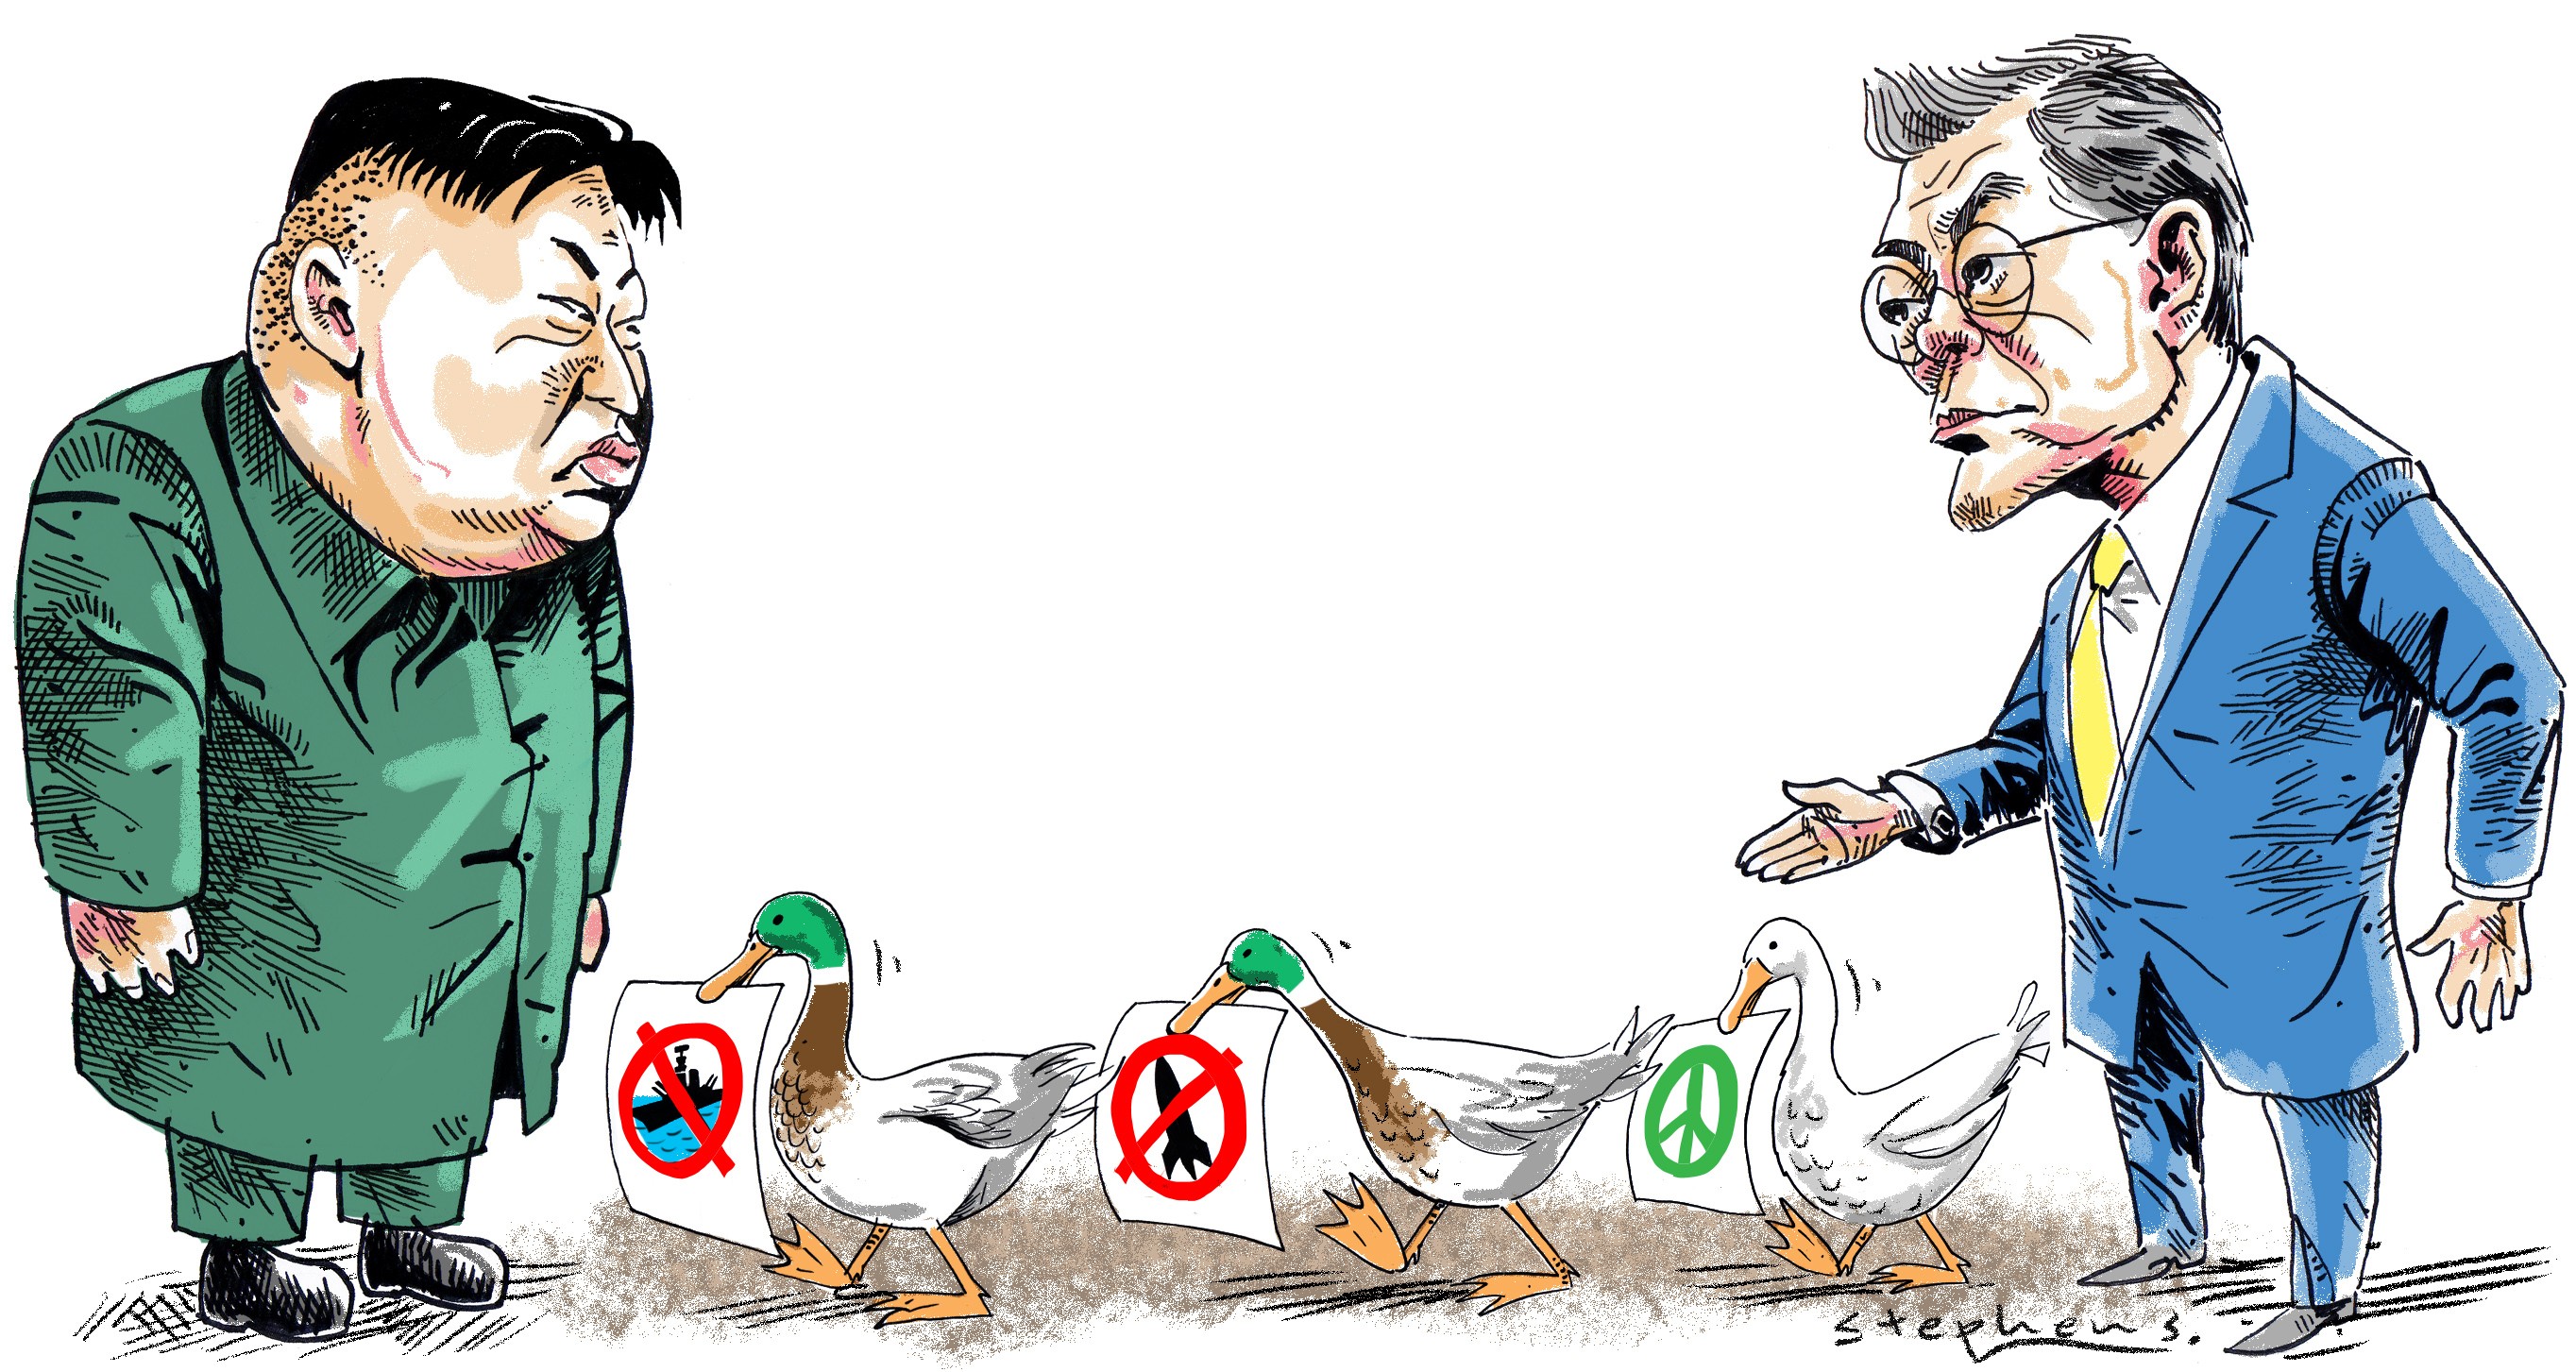 Before responding to Kim Jong-un’s invitation for a summit meeting, South Korean President Moon Jae-in needs to carefully study the record and results of the two previous summit meetings held, and makes sure he gets the right messages across to Kim. Illustration: Craig Stephens